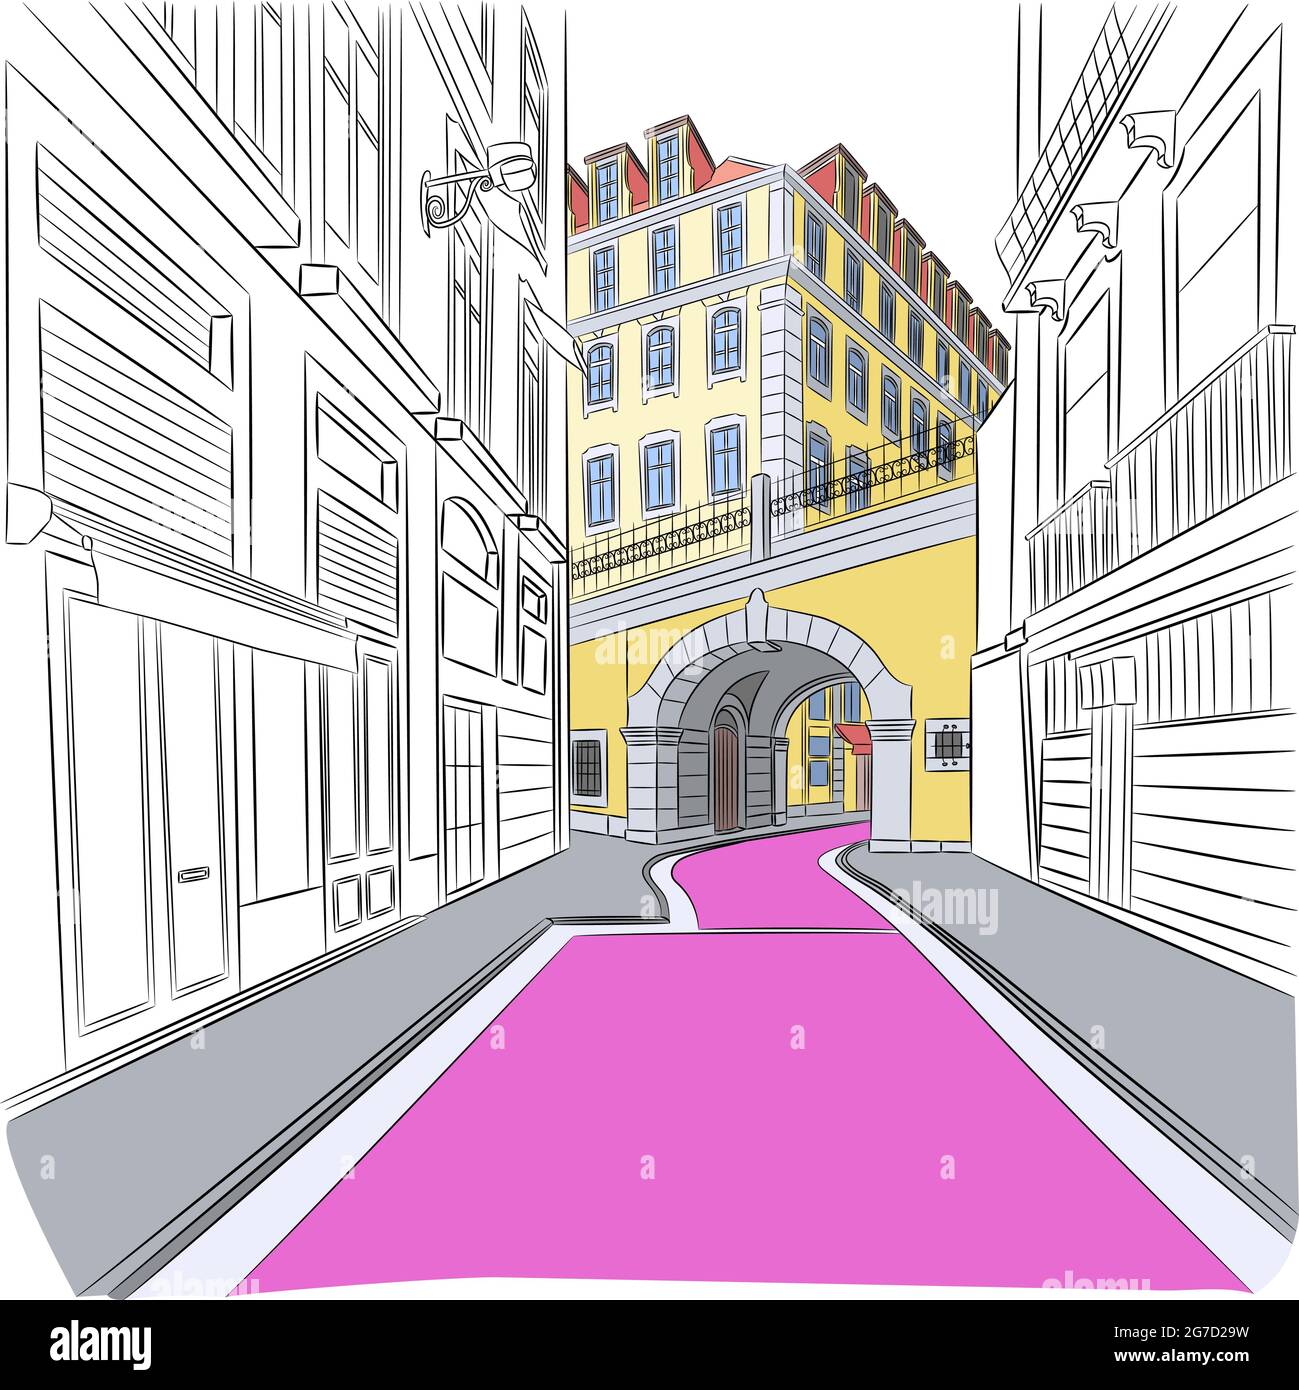 The popular pink street Rua Nova do Carvalho in the Cais do Sodre district in Lisbon, Portugal. Stock Vector